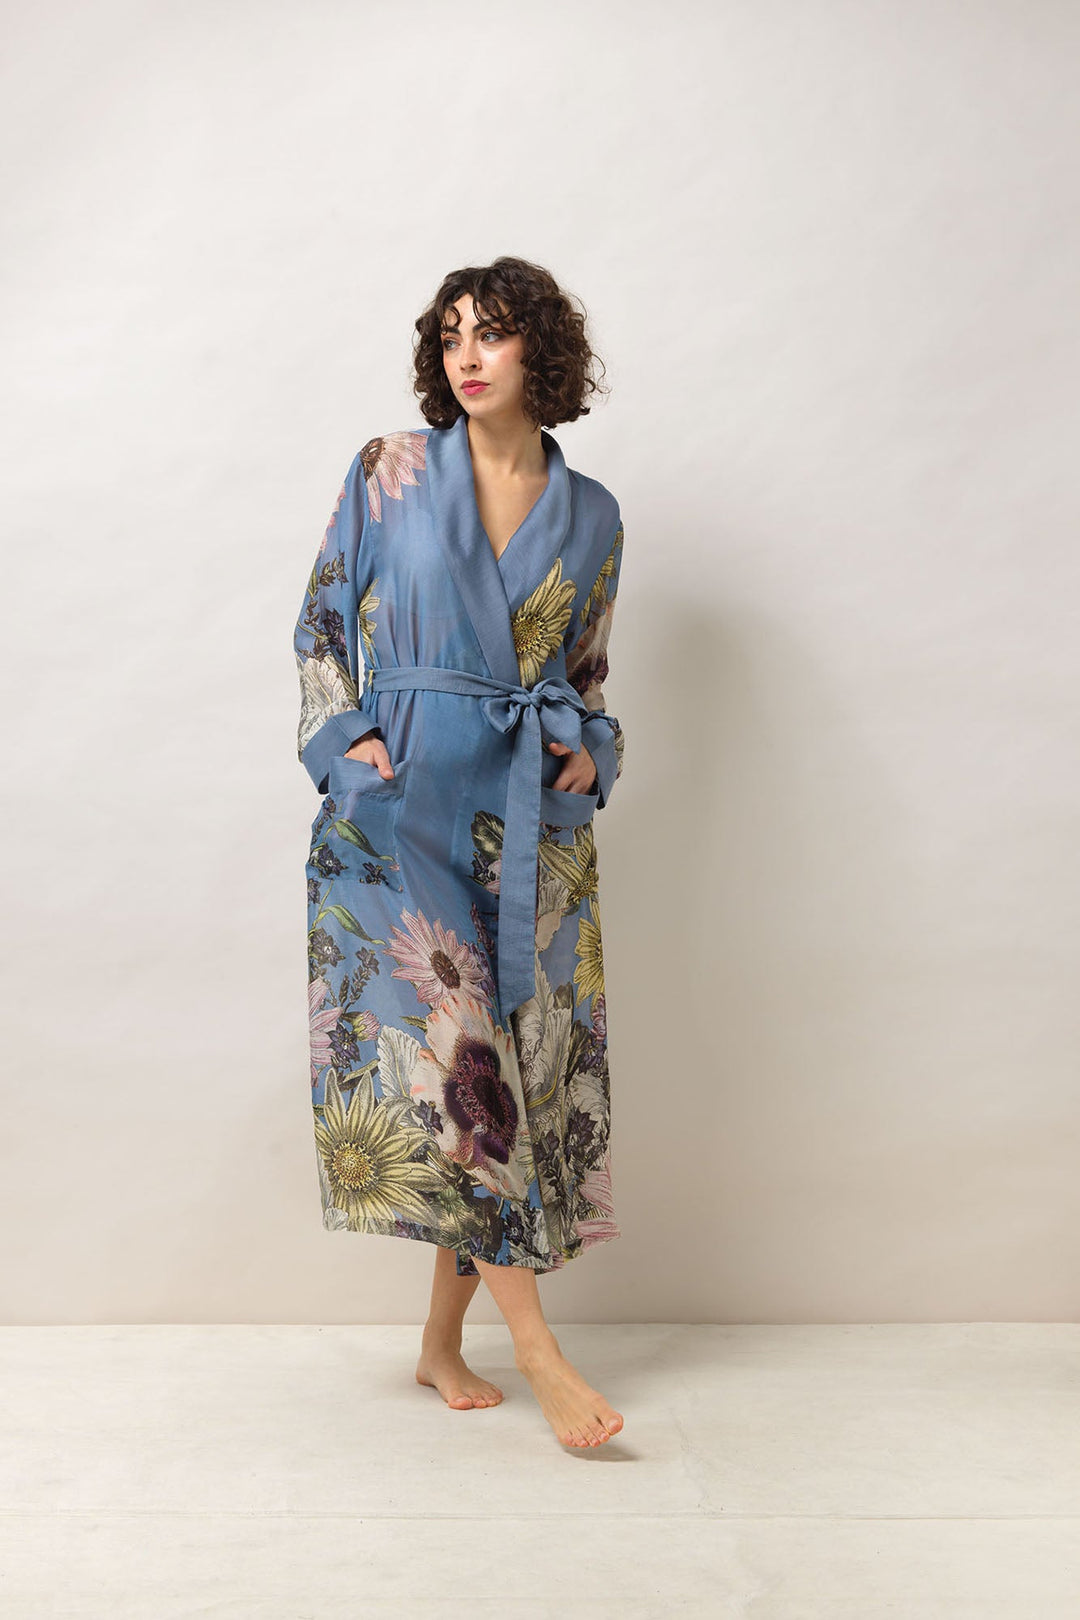 Women's lightweight loungewear gown in cornflower blue with daisy floral print by One Hundred Stars